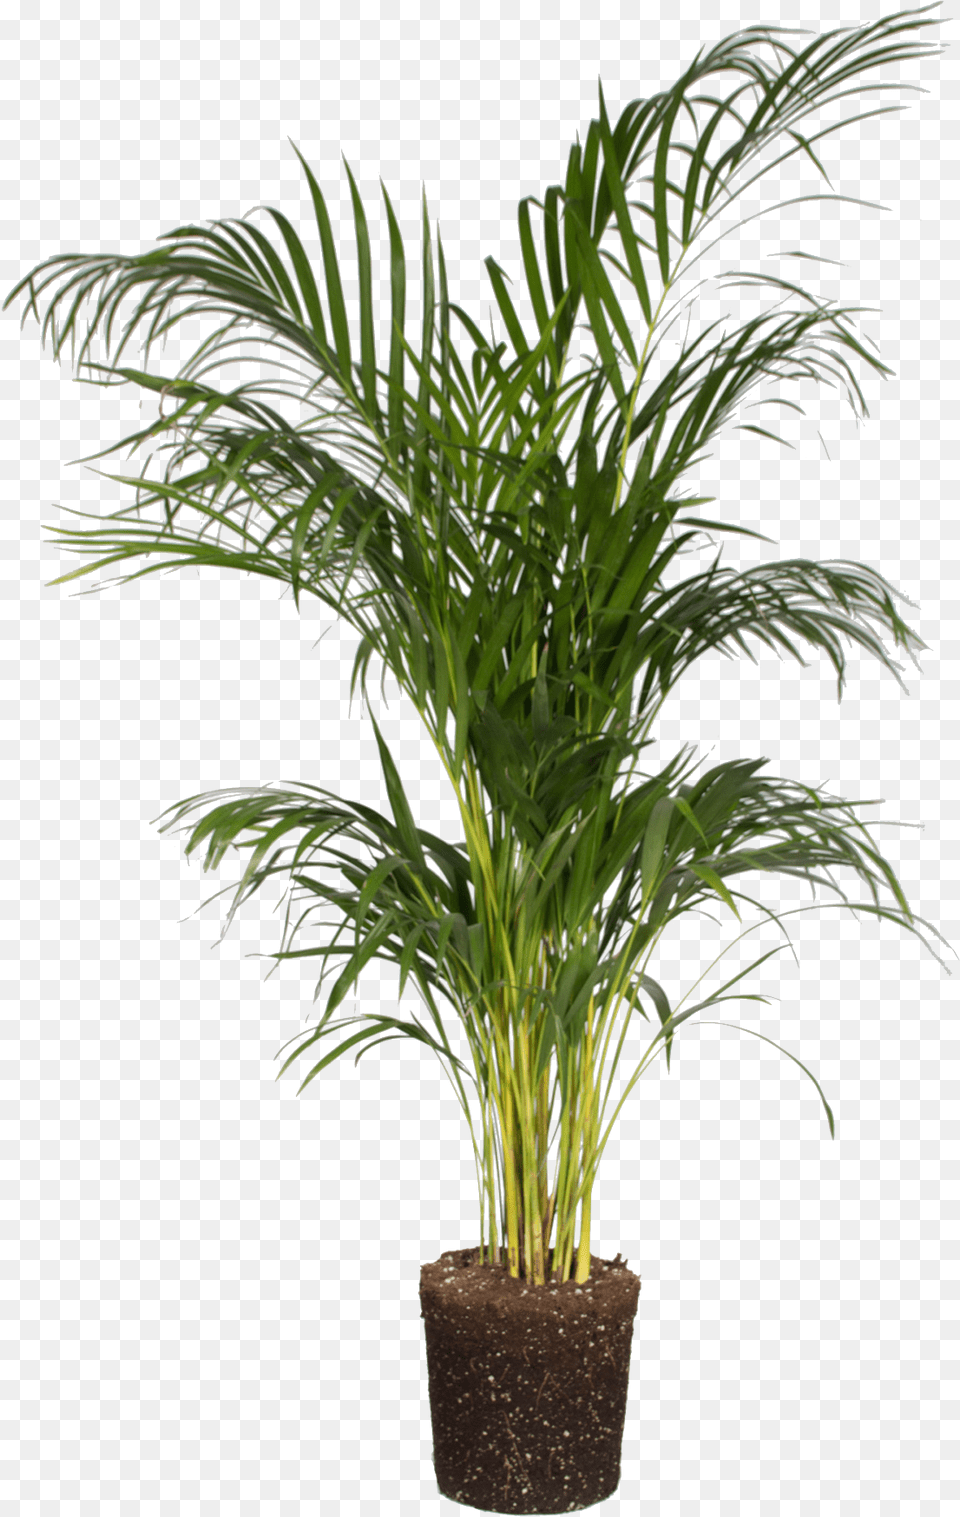 Areca Palm Download Areca Palm Background, Leaf, Palm Tree, Plant, Potted Plant Png